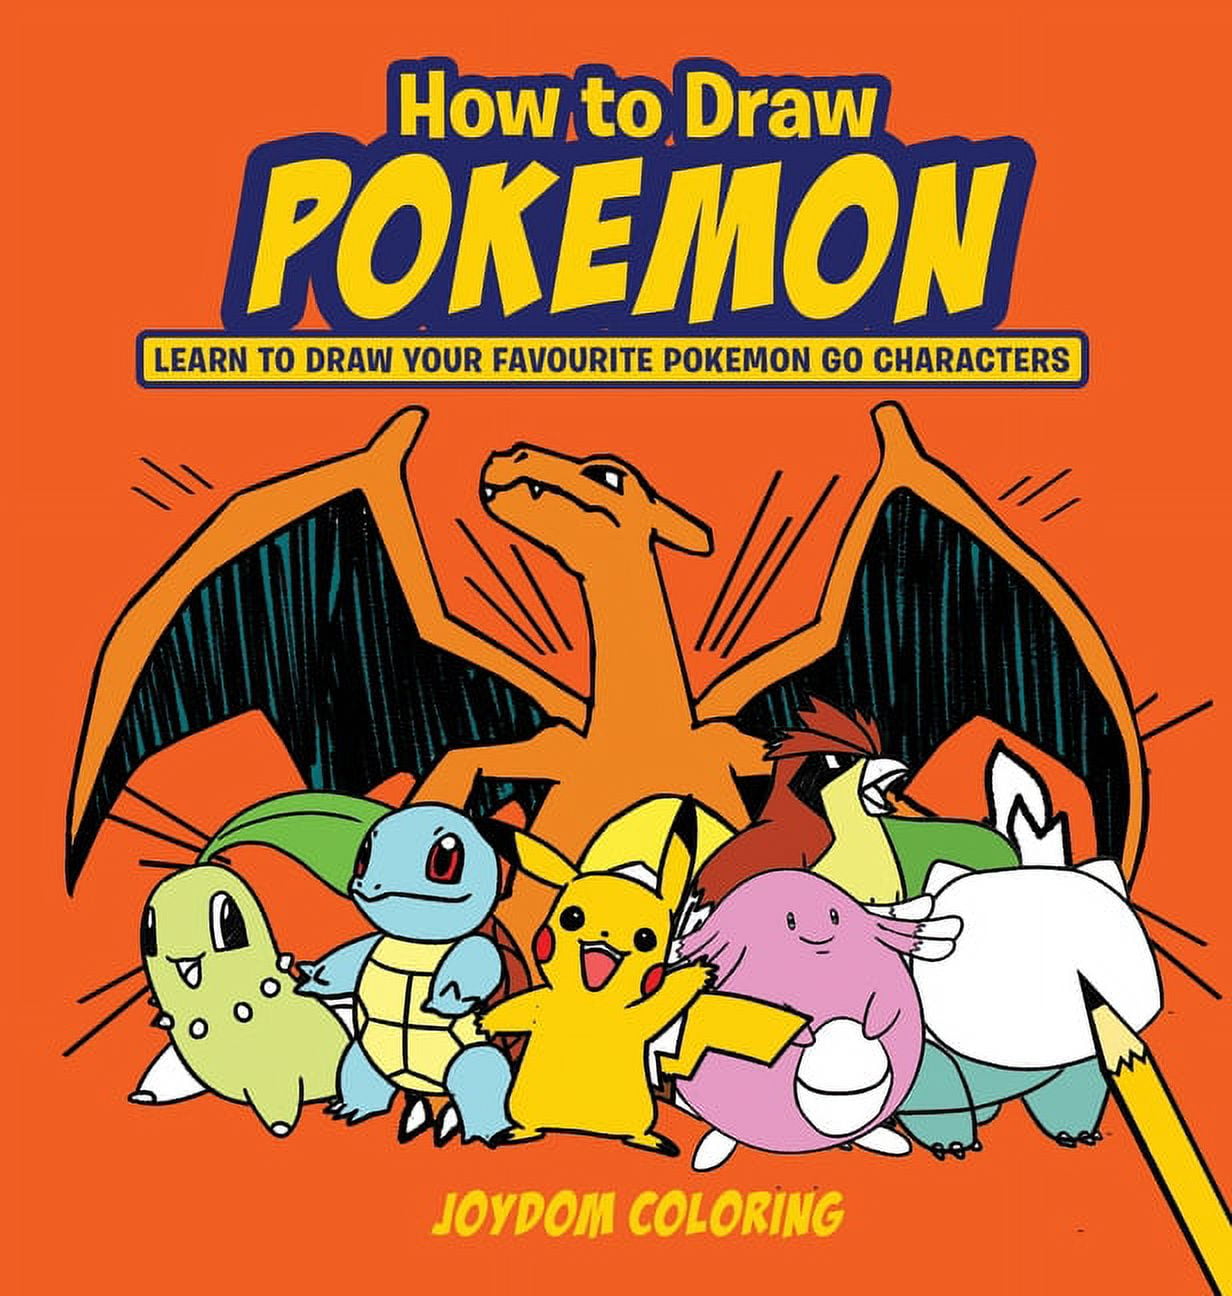 How to Draw Pictures of Pokemon | eHow | Graffiti characters, Drawings,  Pokemon pictures